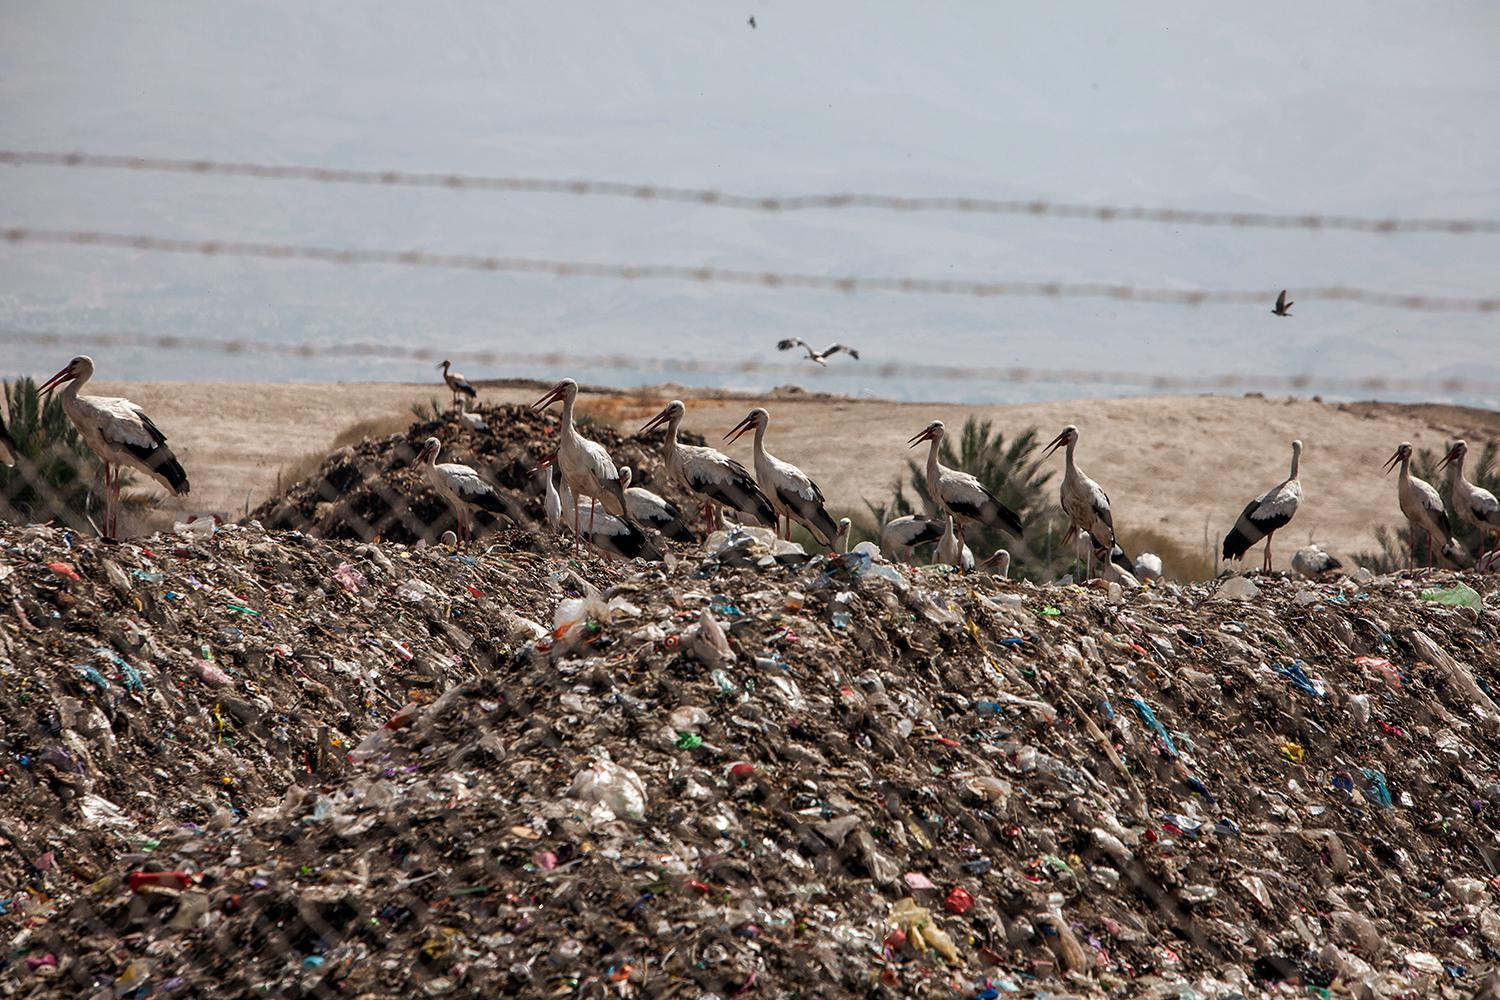 Storks rest on mounds of garbage in a landfill in the Jordan Valley. Located in the occupied West Bank, the landfill exclusively services Israel and settlements. © 2015 Yoray Liberman